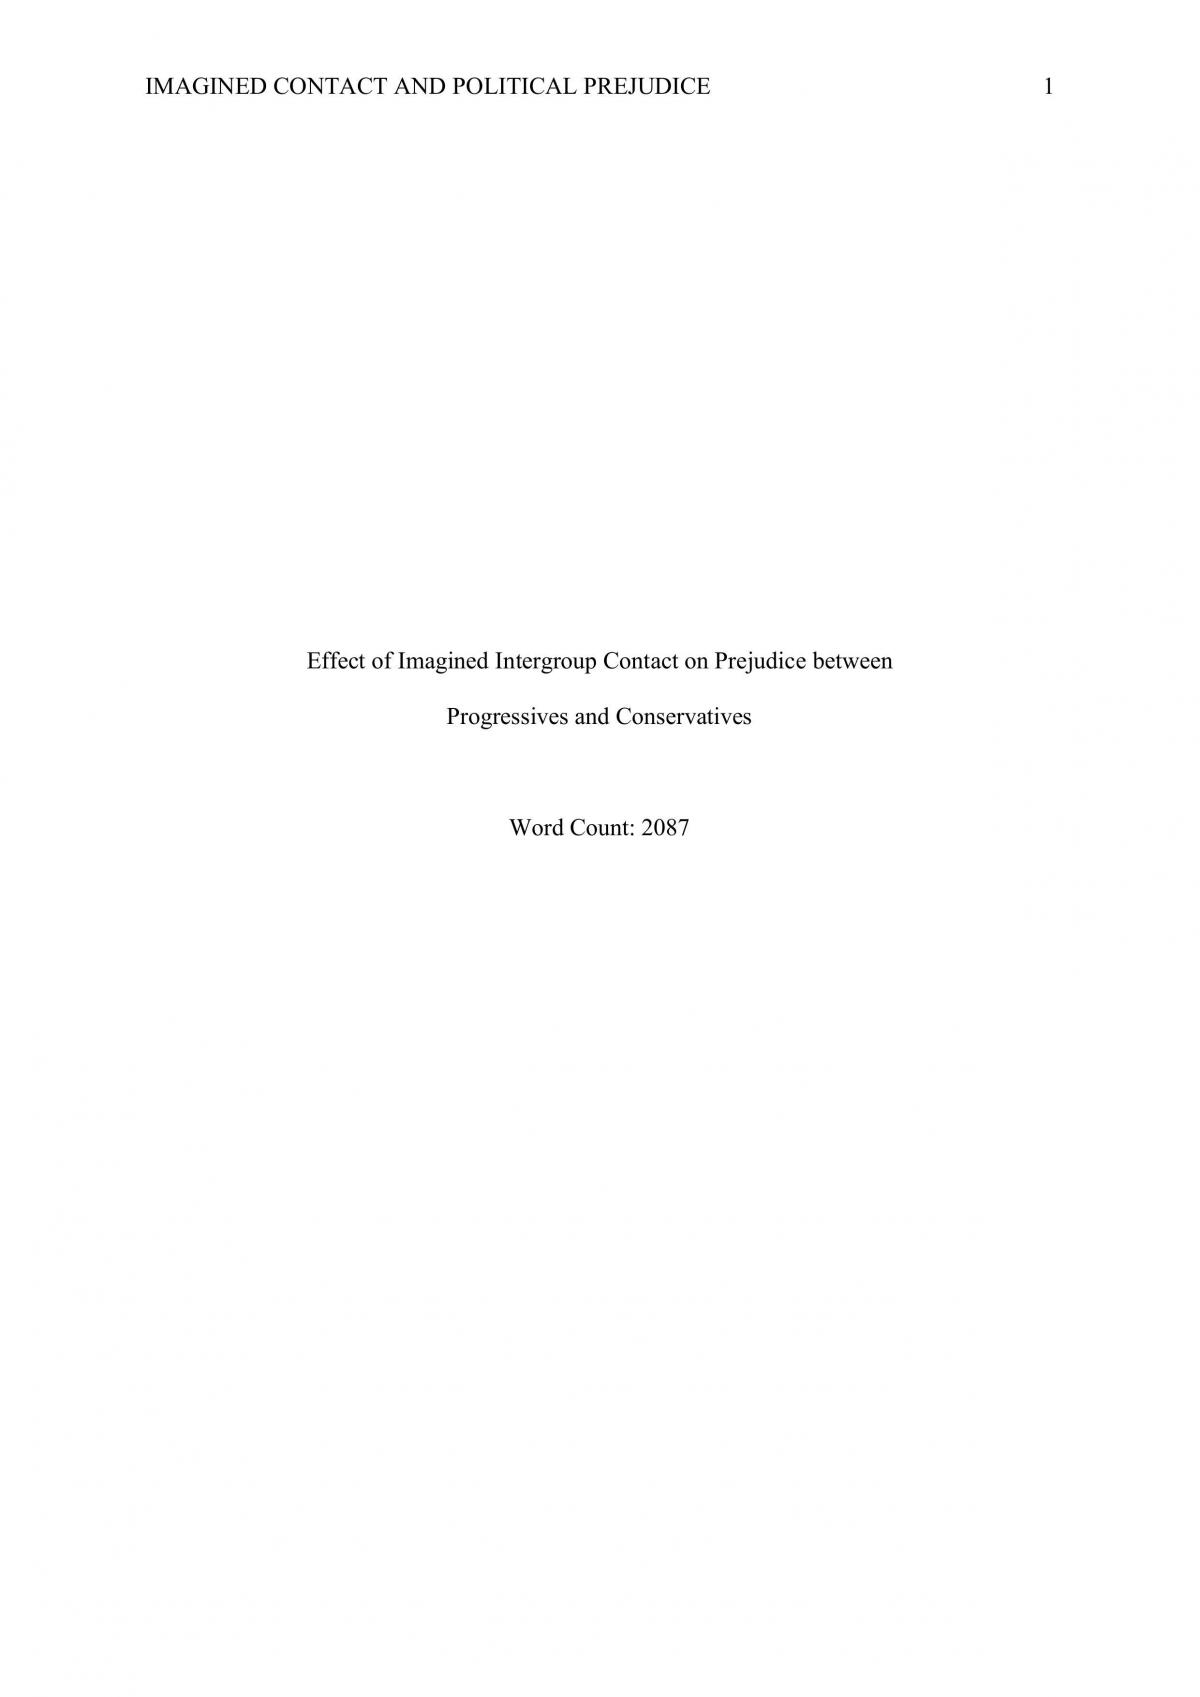 PSYC2017 Research Report - Page 1